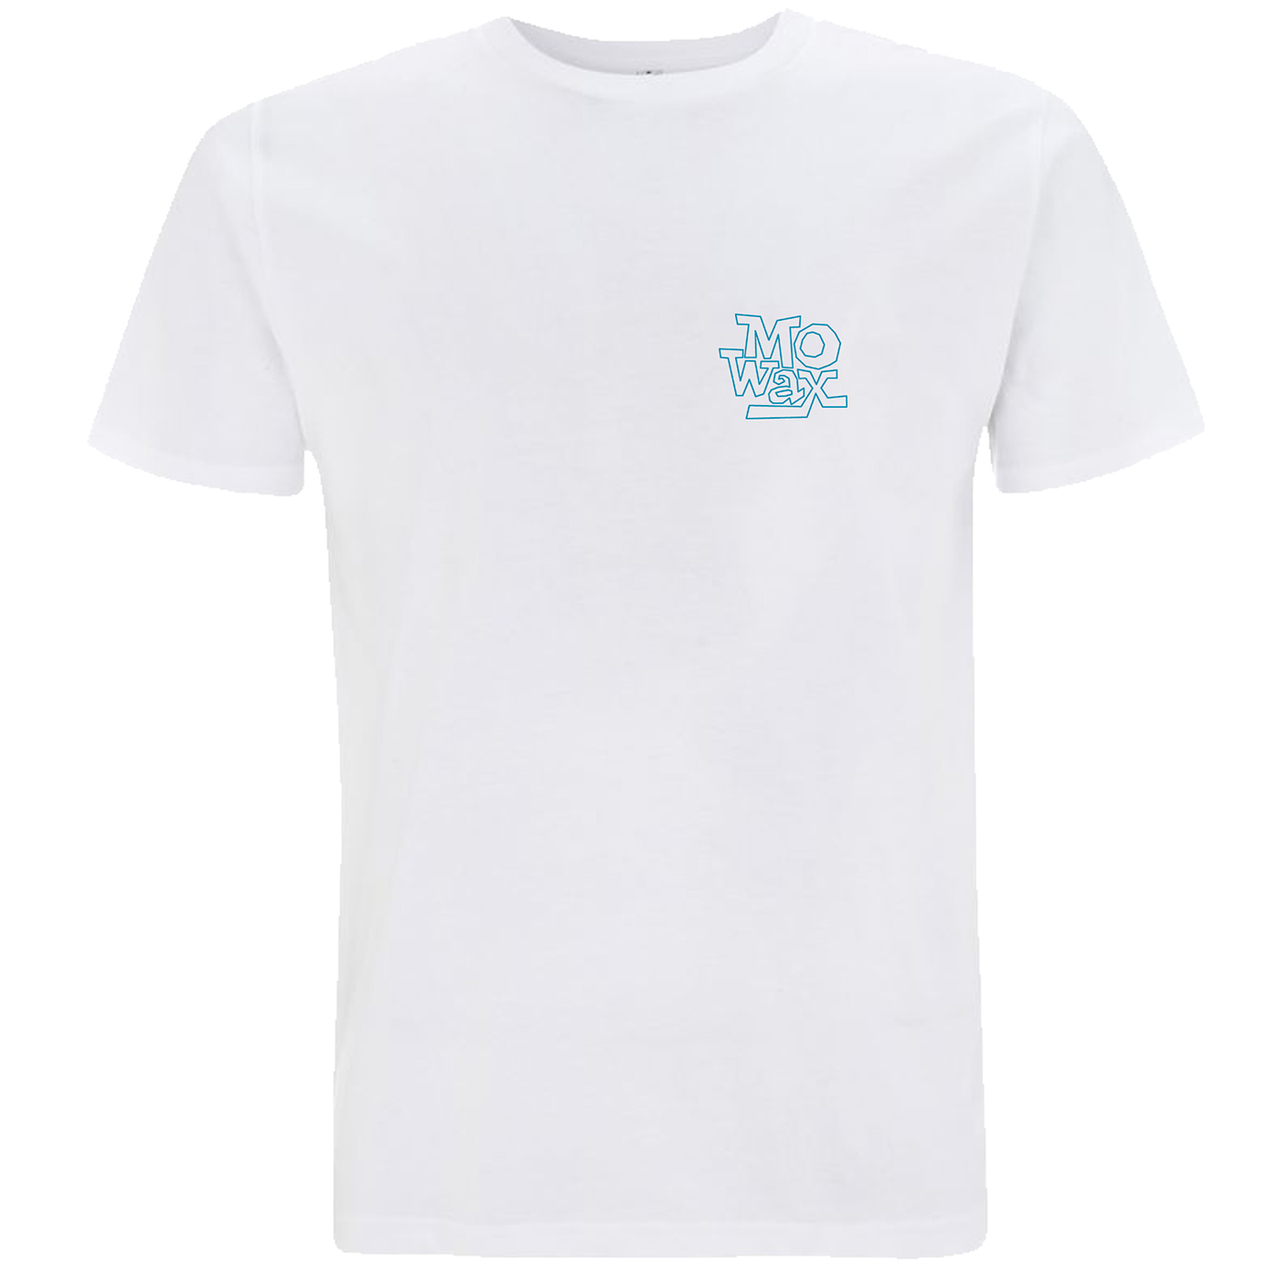 File:1of100 Mo Wax Tee Blue Front.jpg